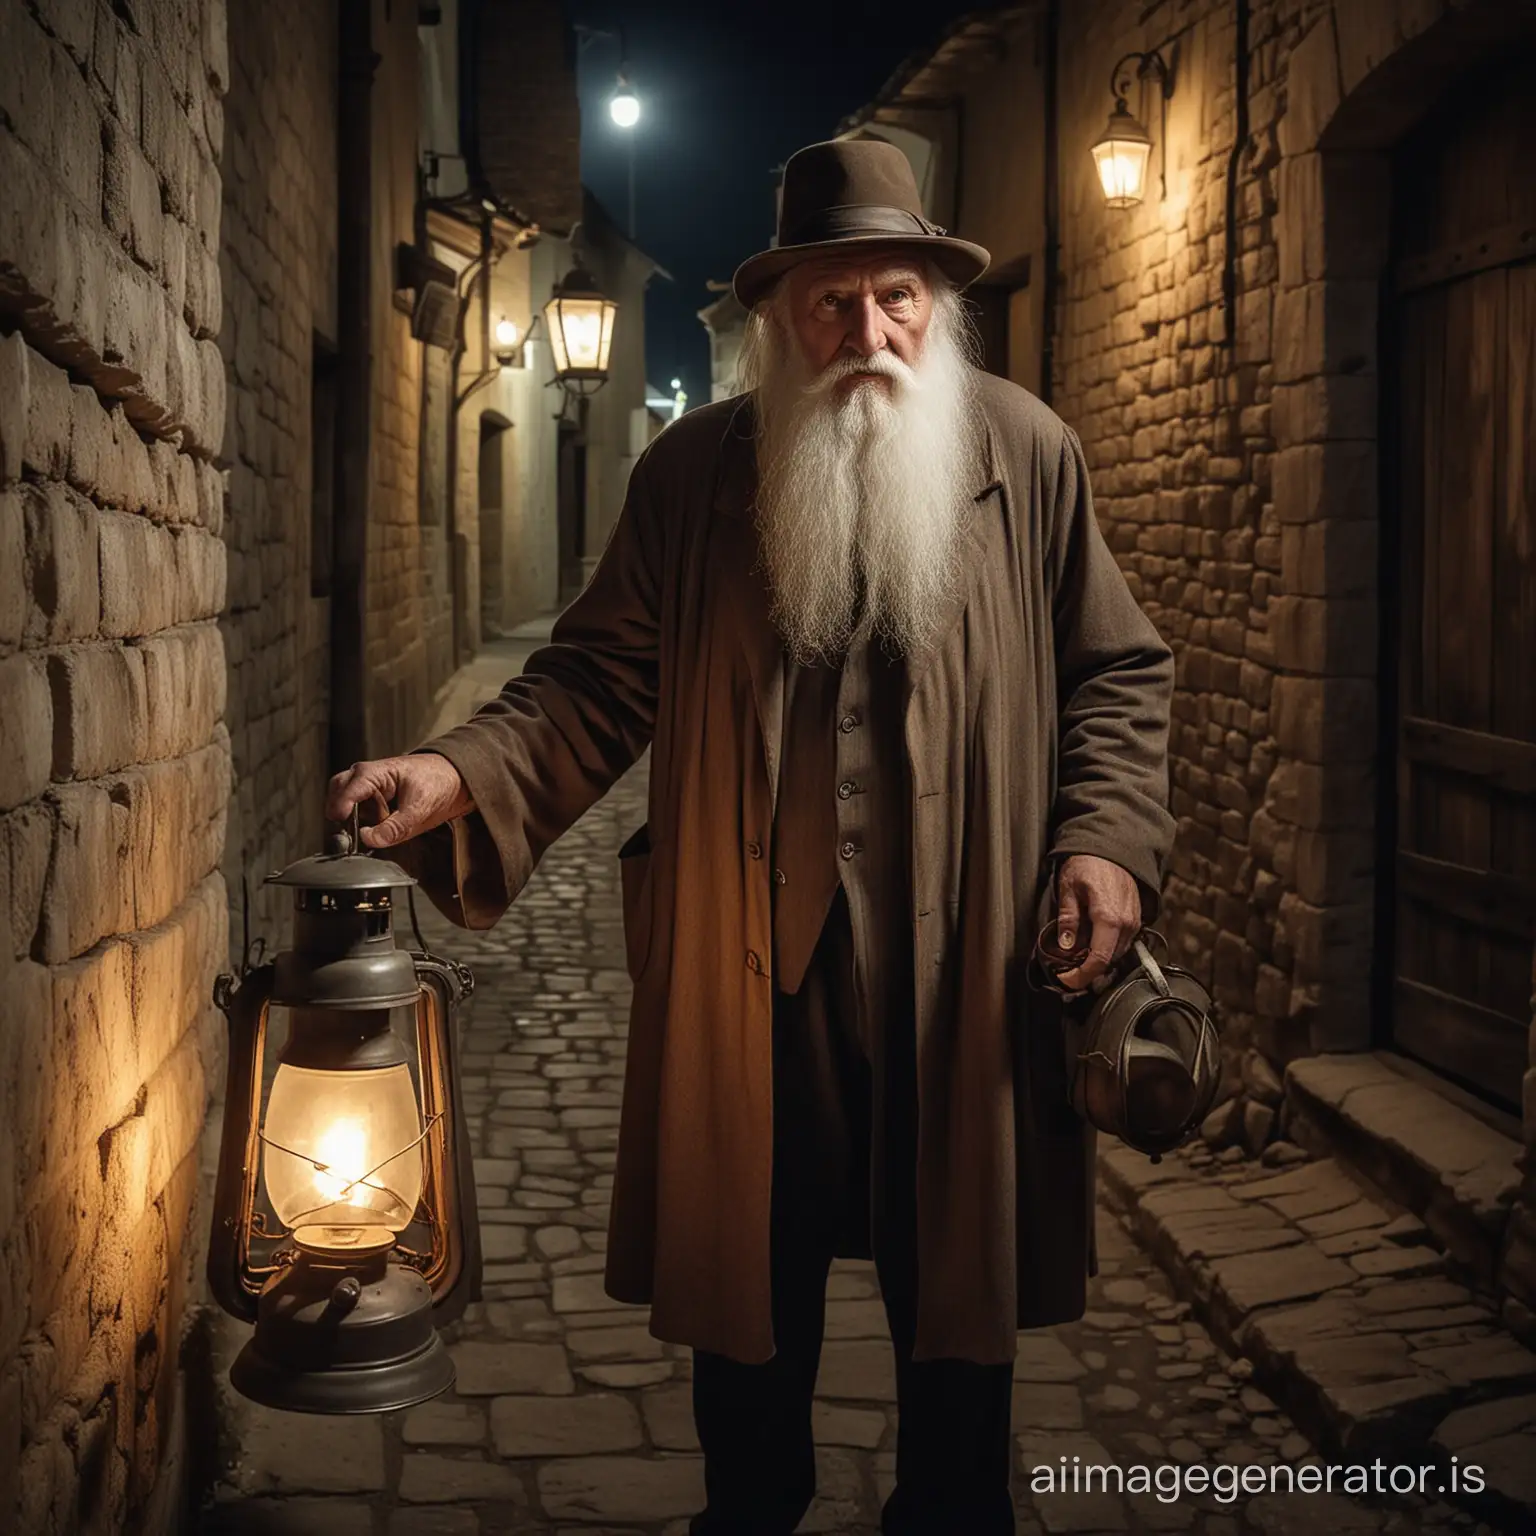 an old tall man, wearing a hat, with a long white beard, holding an old lamp lit in the night, in an alley of a medieval village in 1930, color image, the old man is looking at the camera lens taking his picture and appears threatening